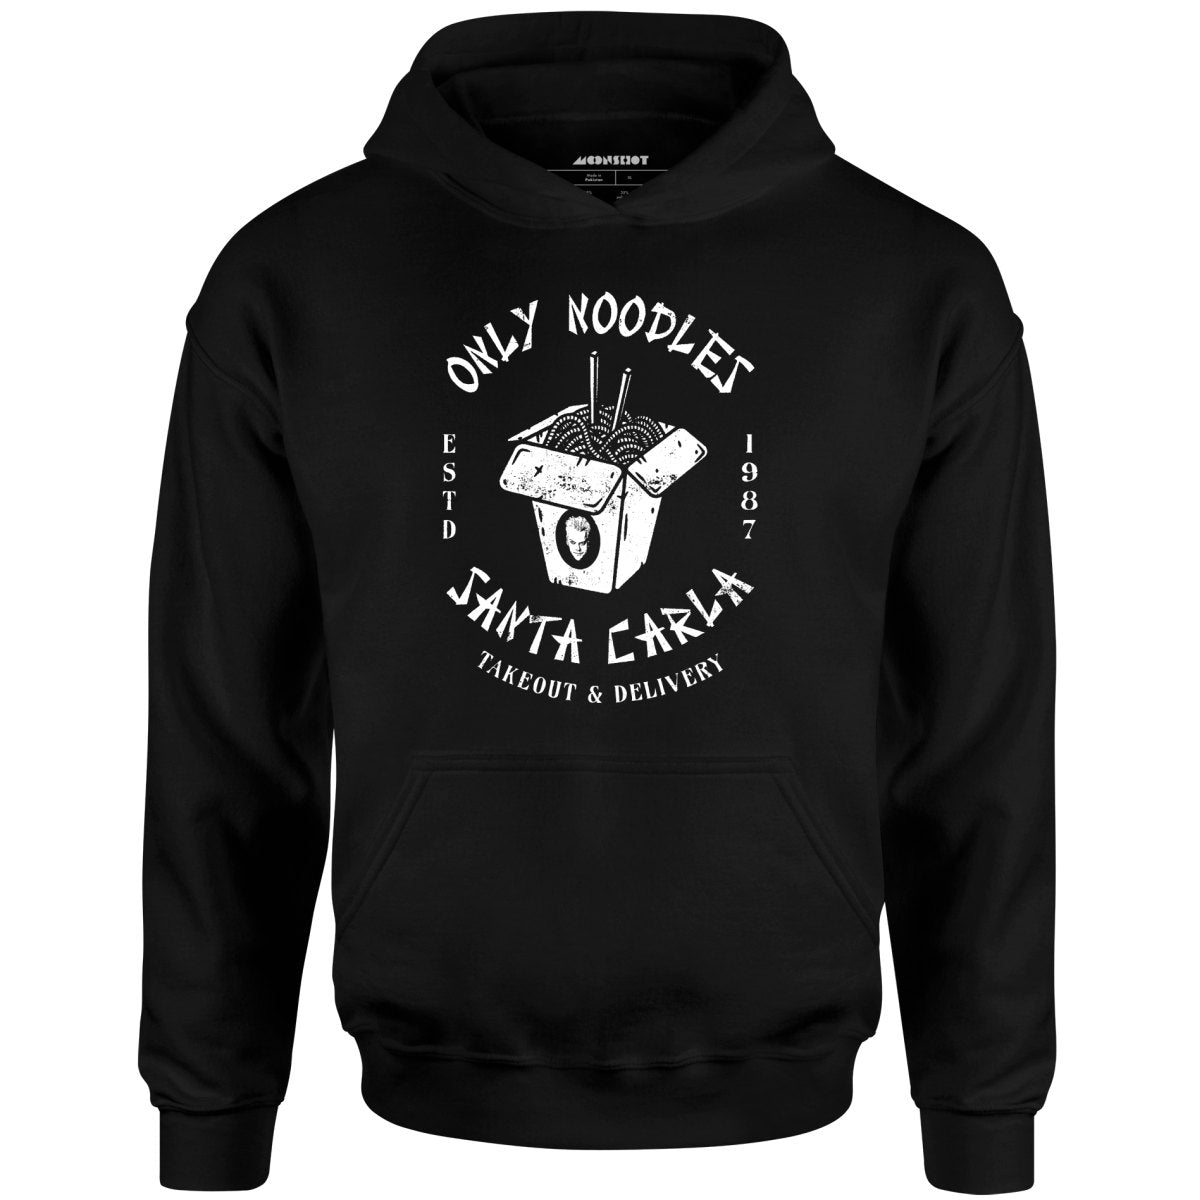 Only Noodles Takeout & Delivery - Santa Carla - Unisex Hoodie